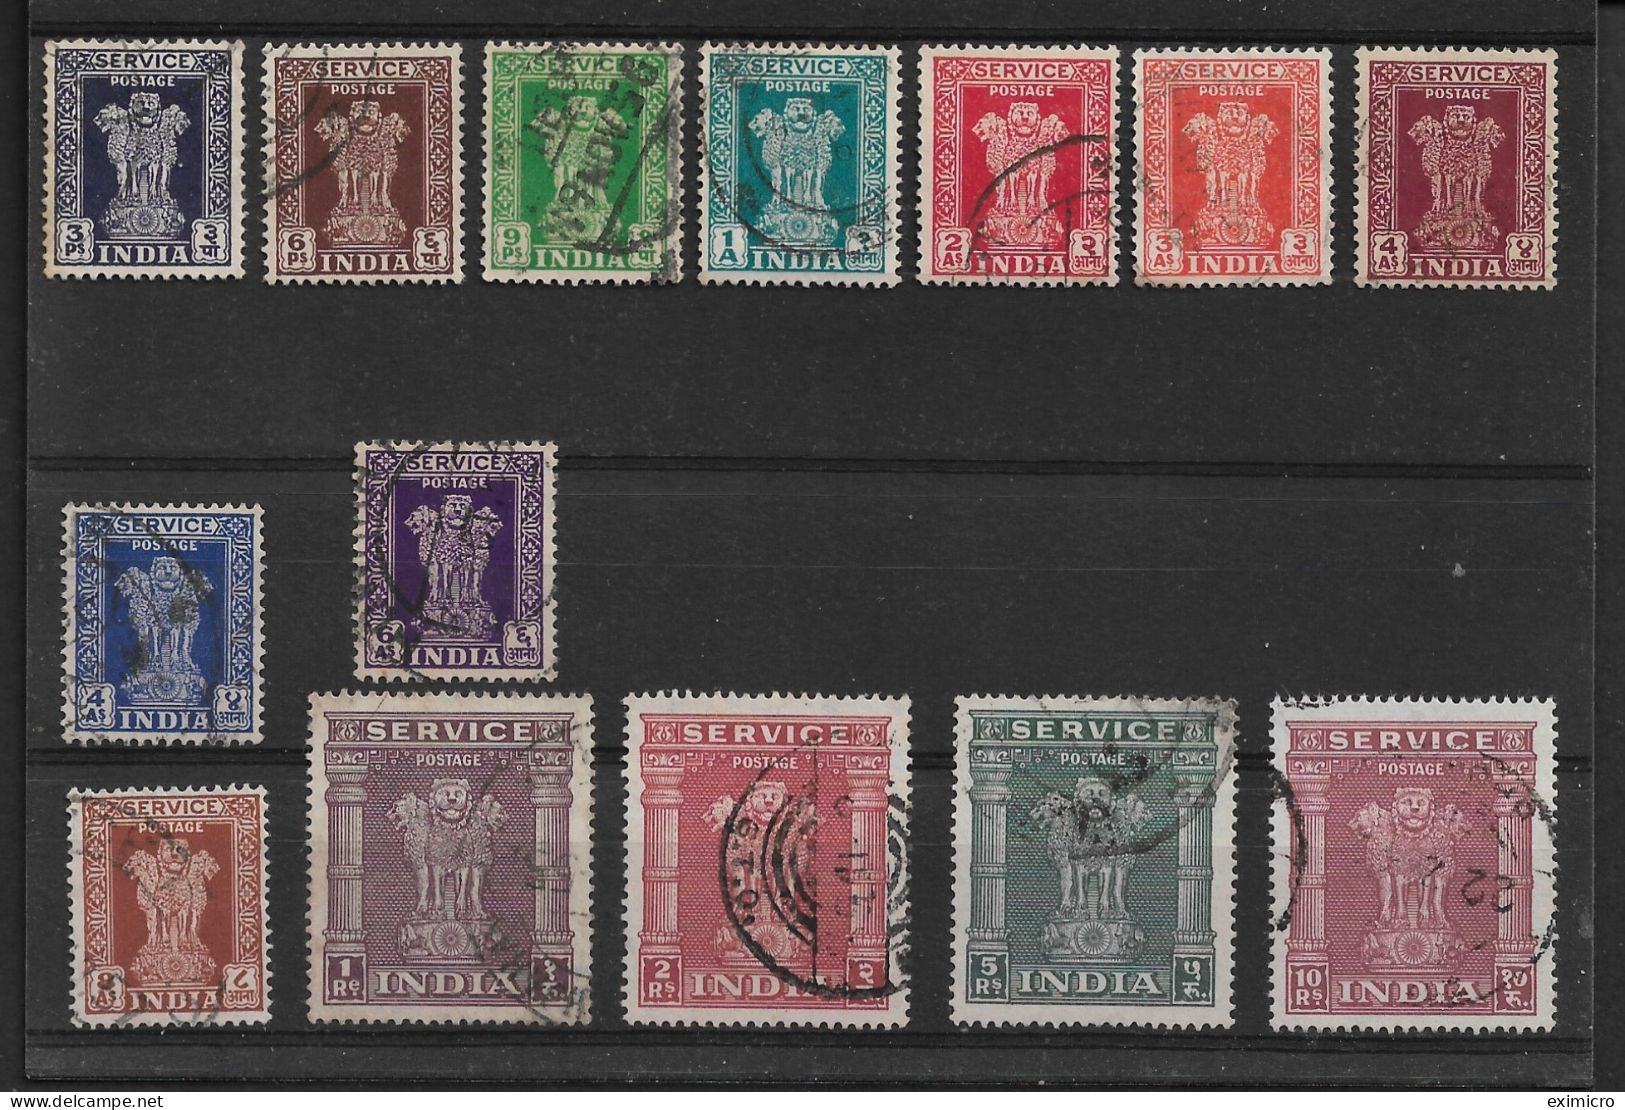 INDIA 1950 - 1951 OFFICIALS SET SG O151/O164 FINE USED Cat £42 - Official Stamps